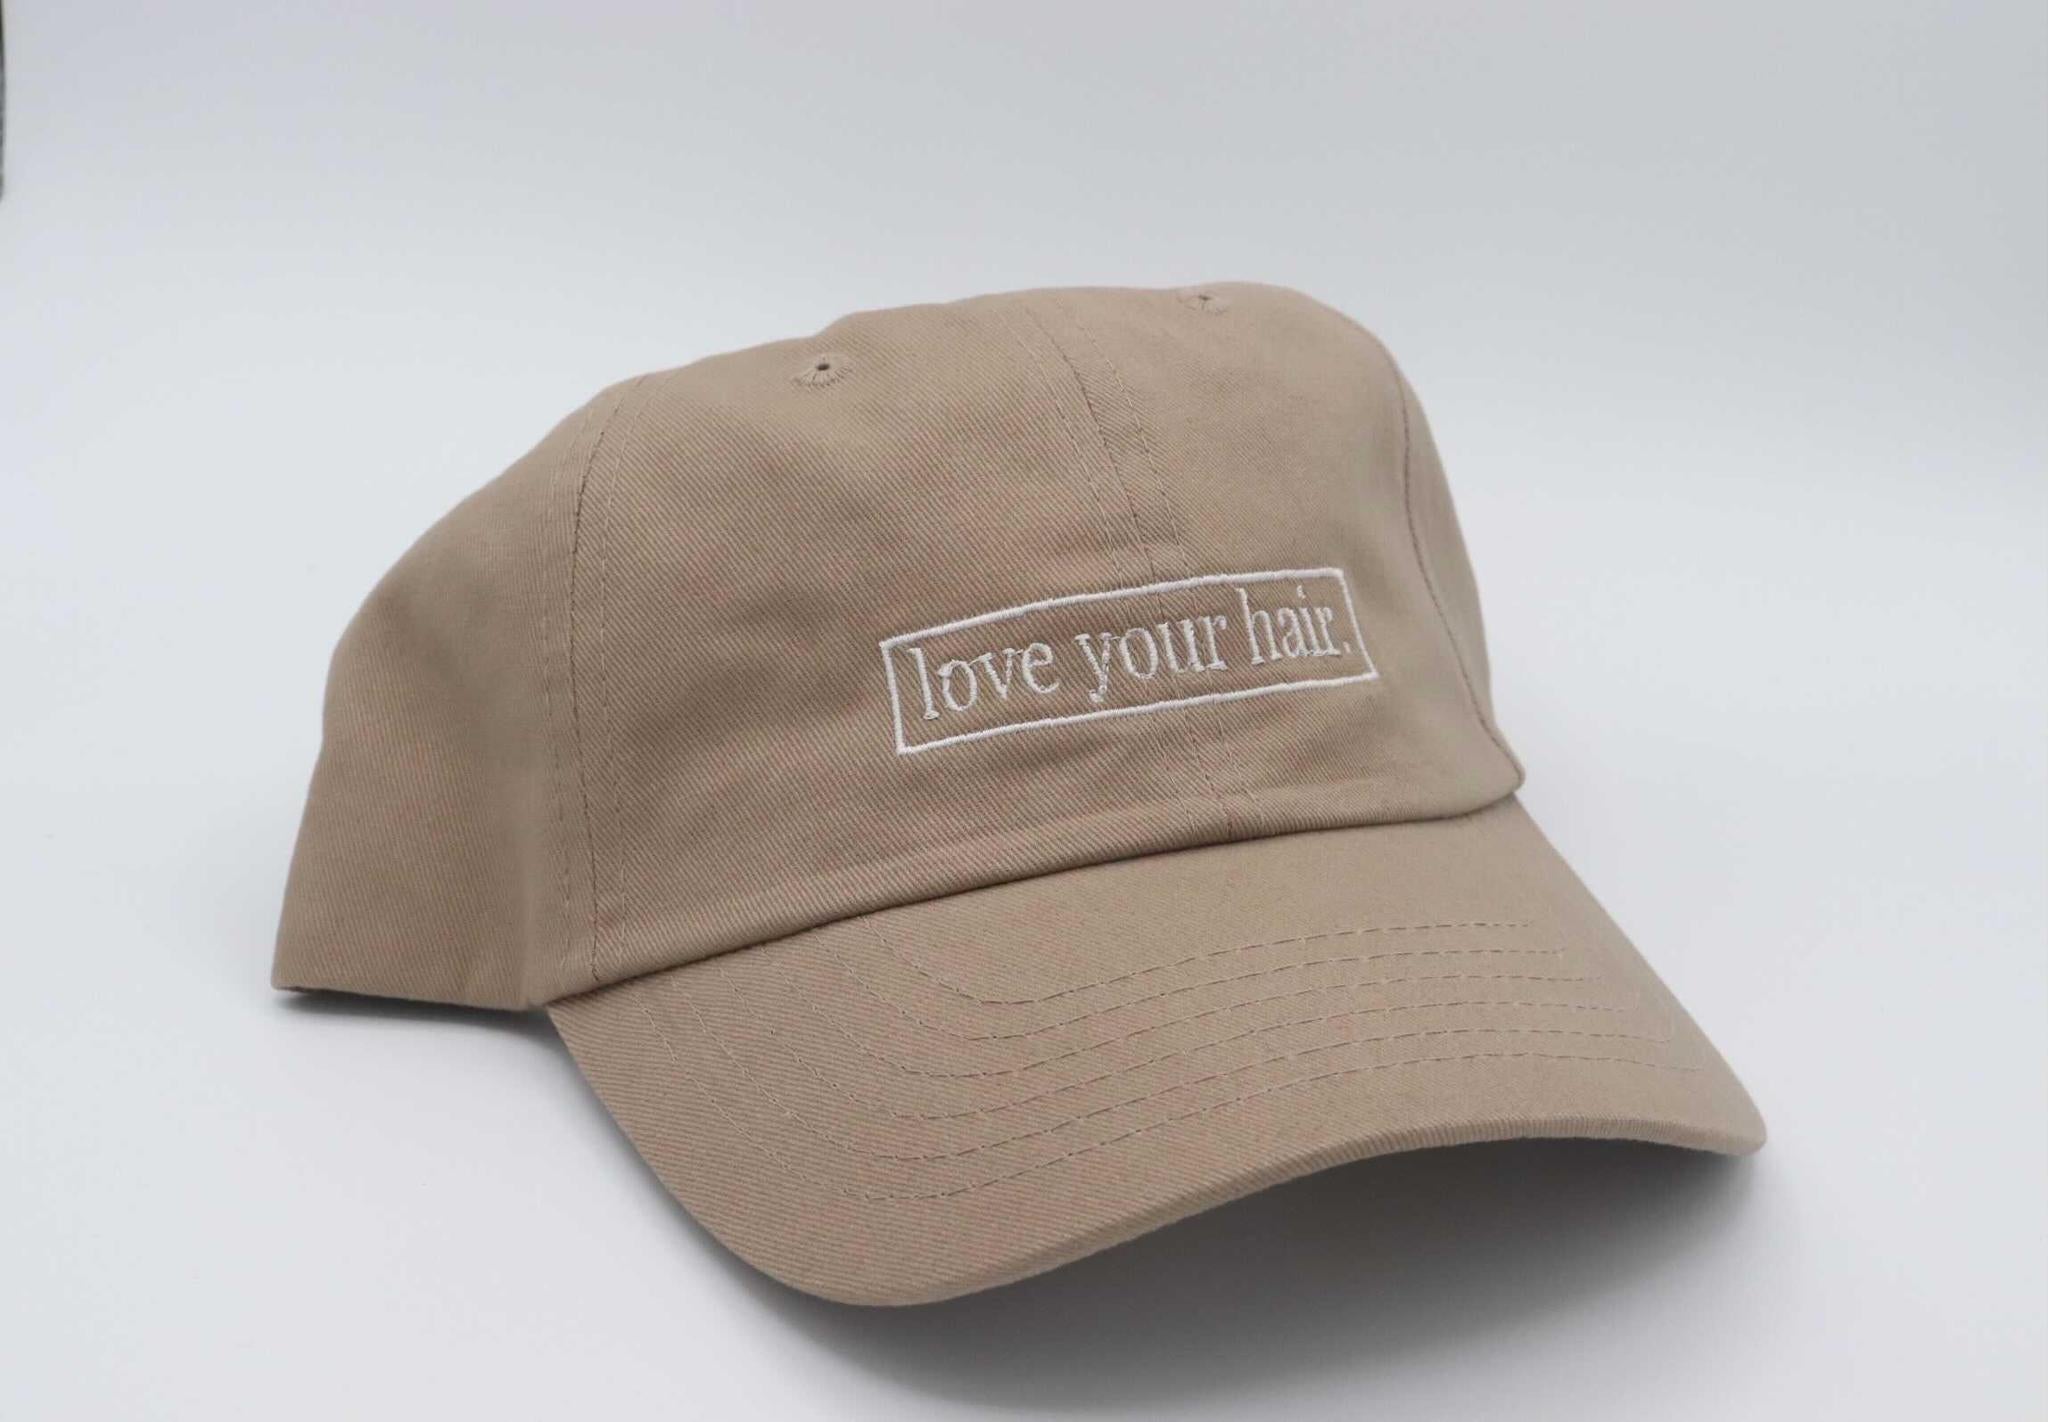 FREE "Love Your Hair" Hat